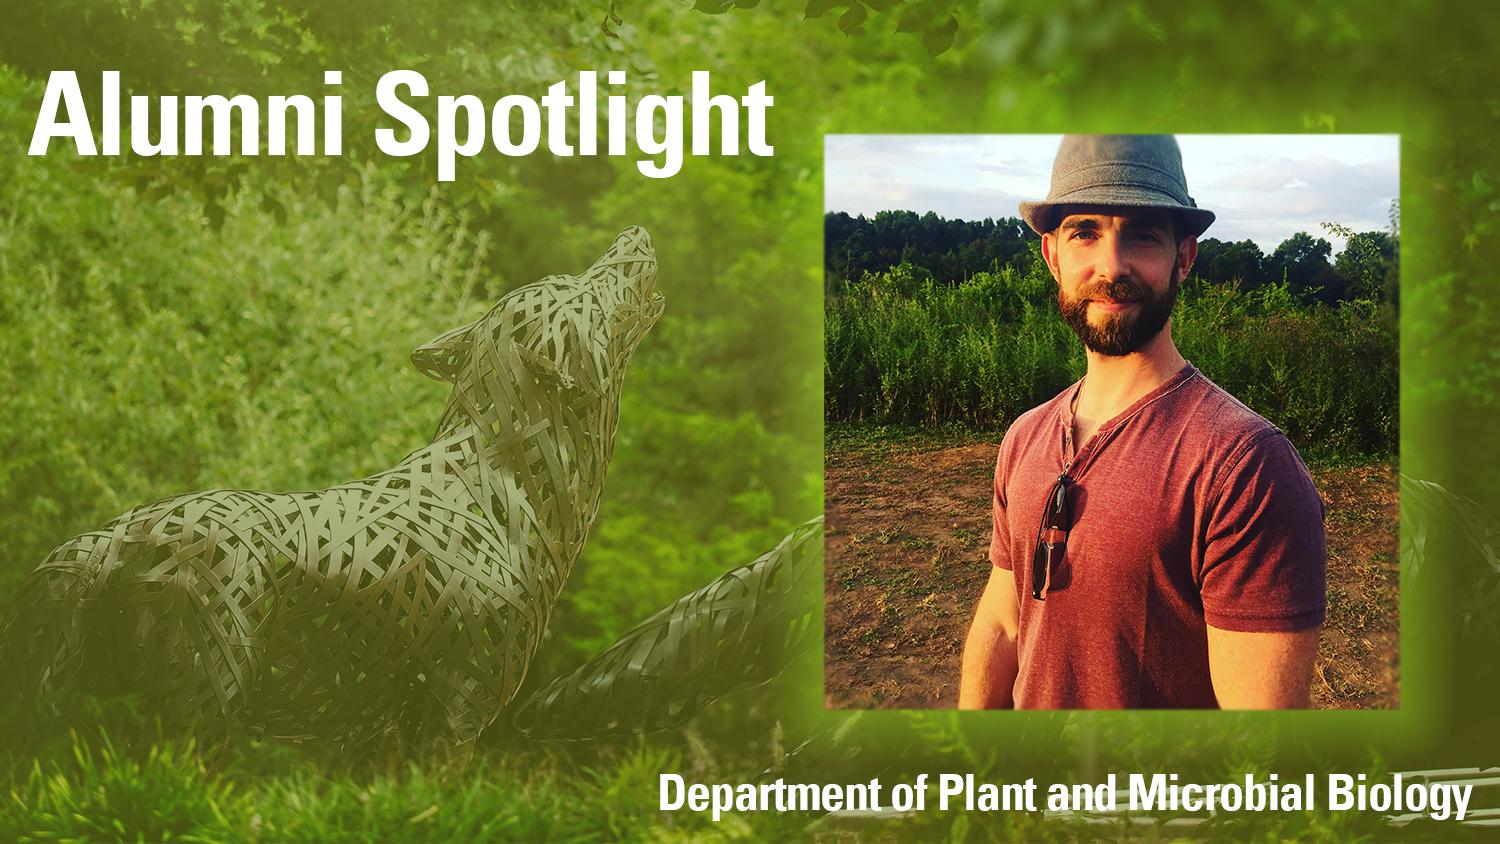 Picture of Nick with NCSU wolf backdrop - says "Alumni Spotlight" and "Department of Plant and Microbial Biology"